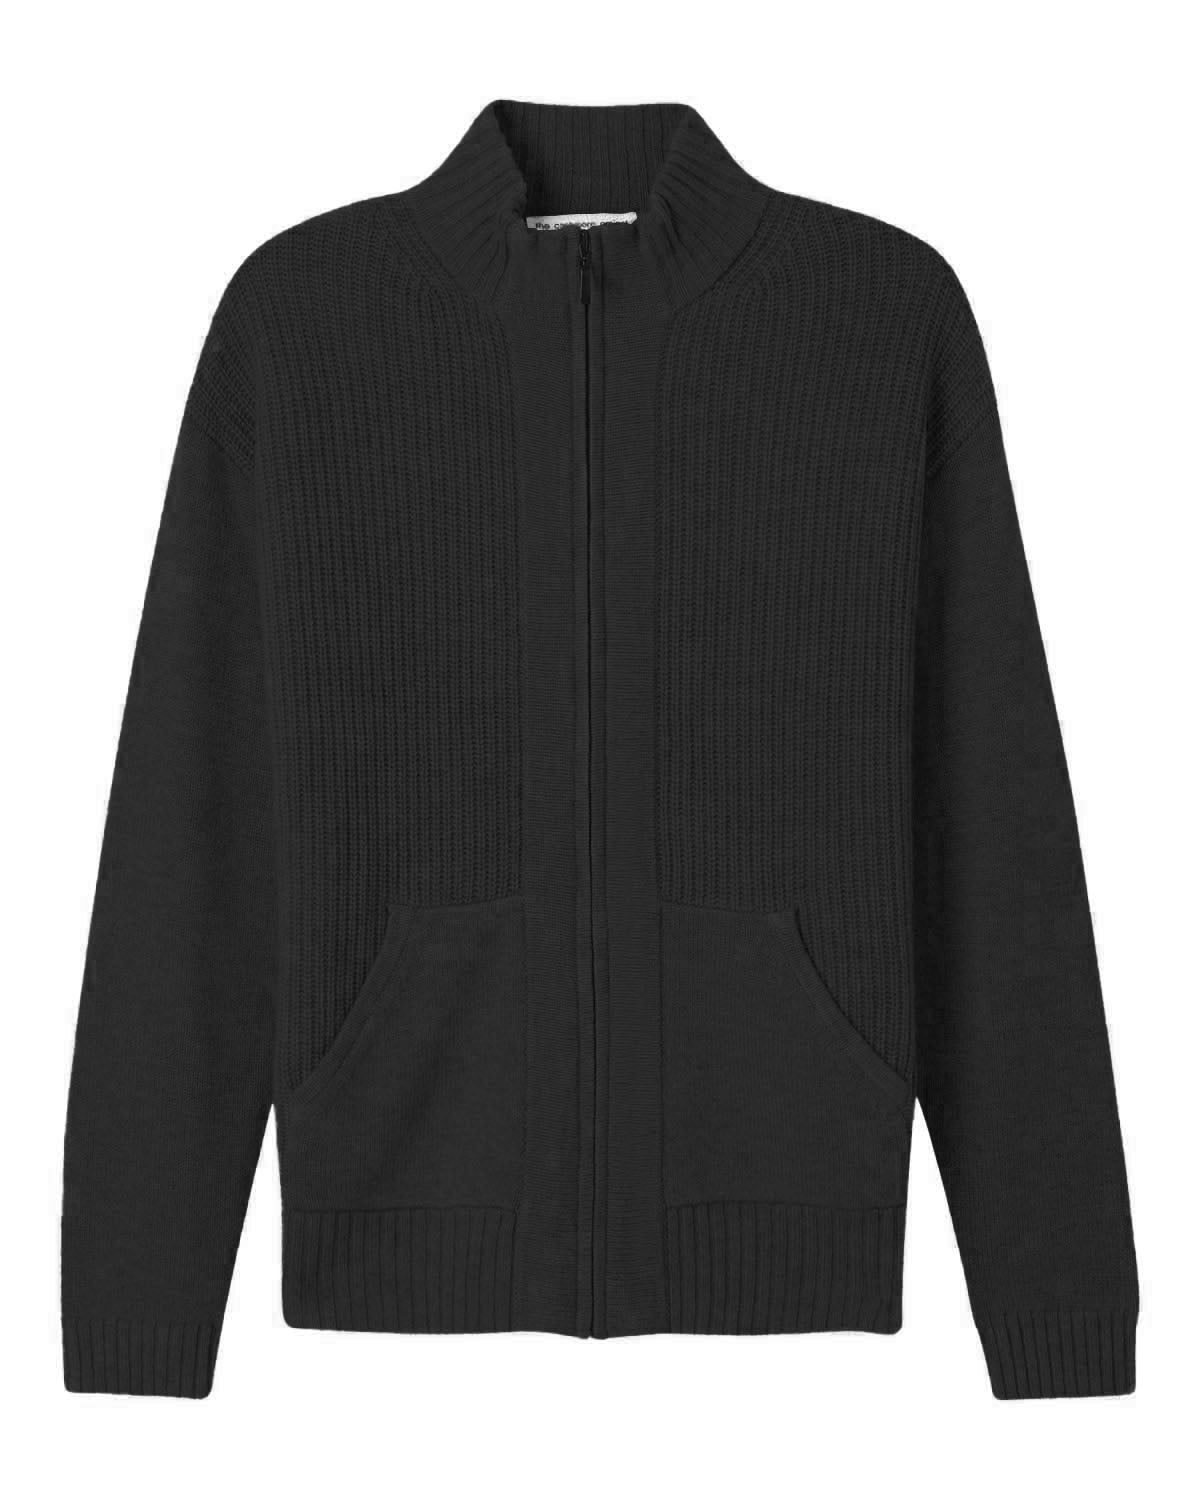 Luxe Cashmere Zip Jacket – The Cashmere Sale